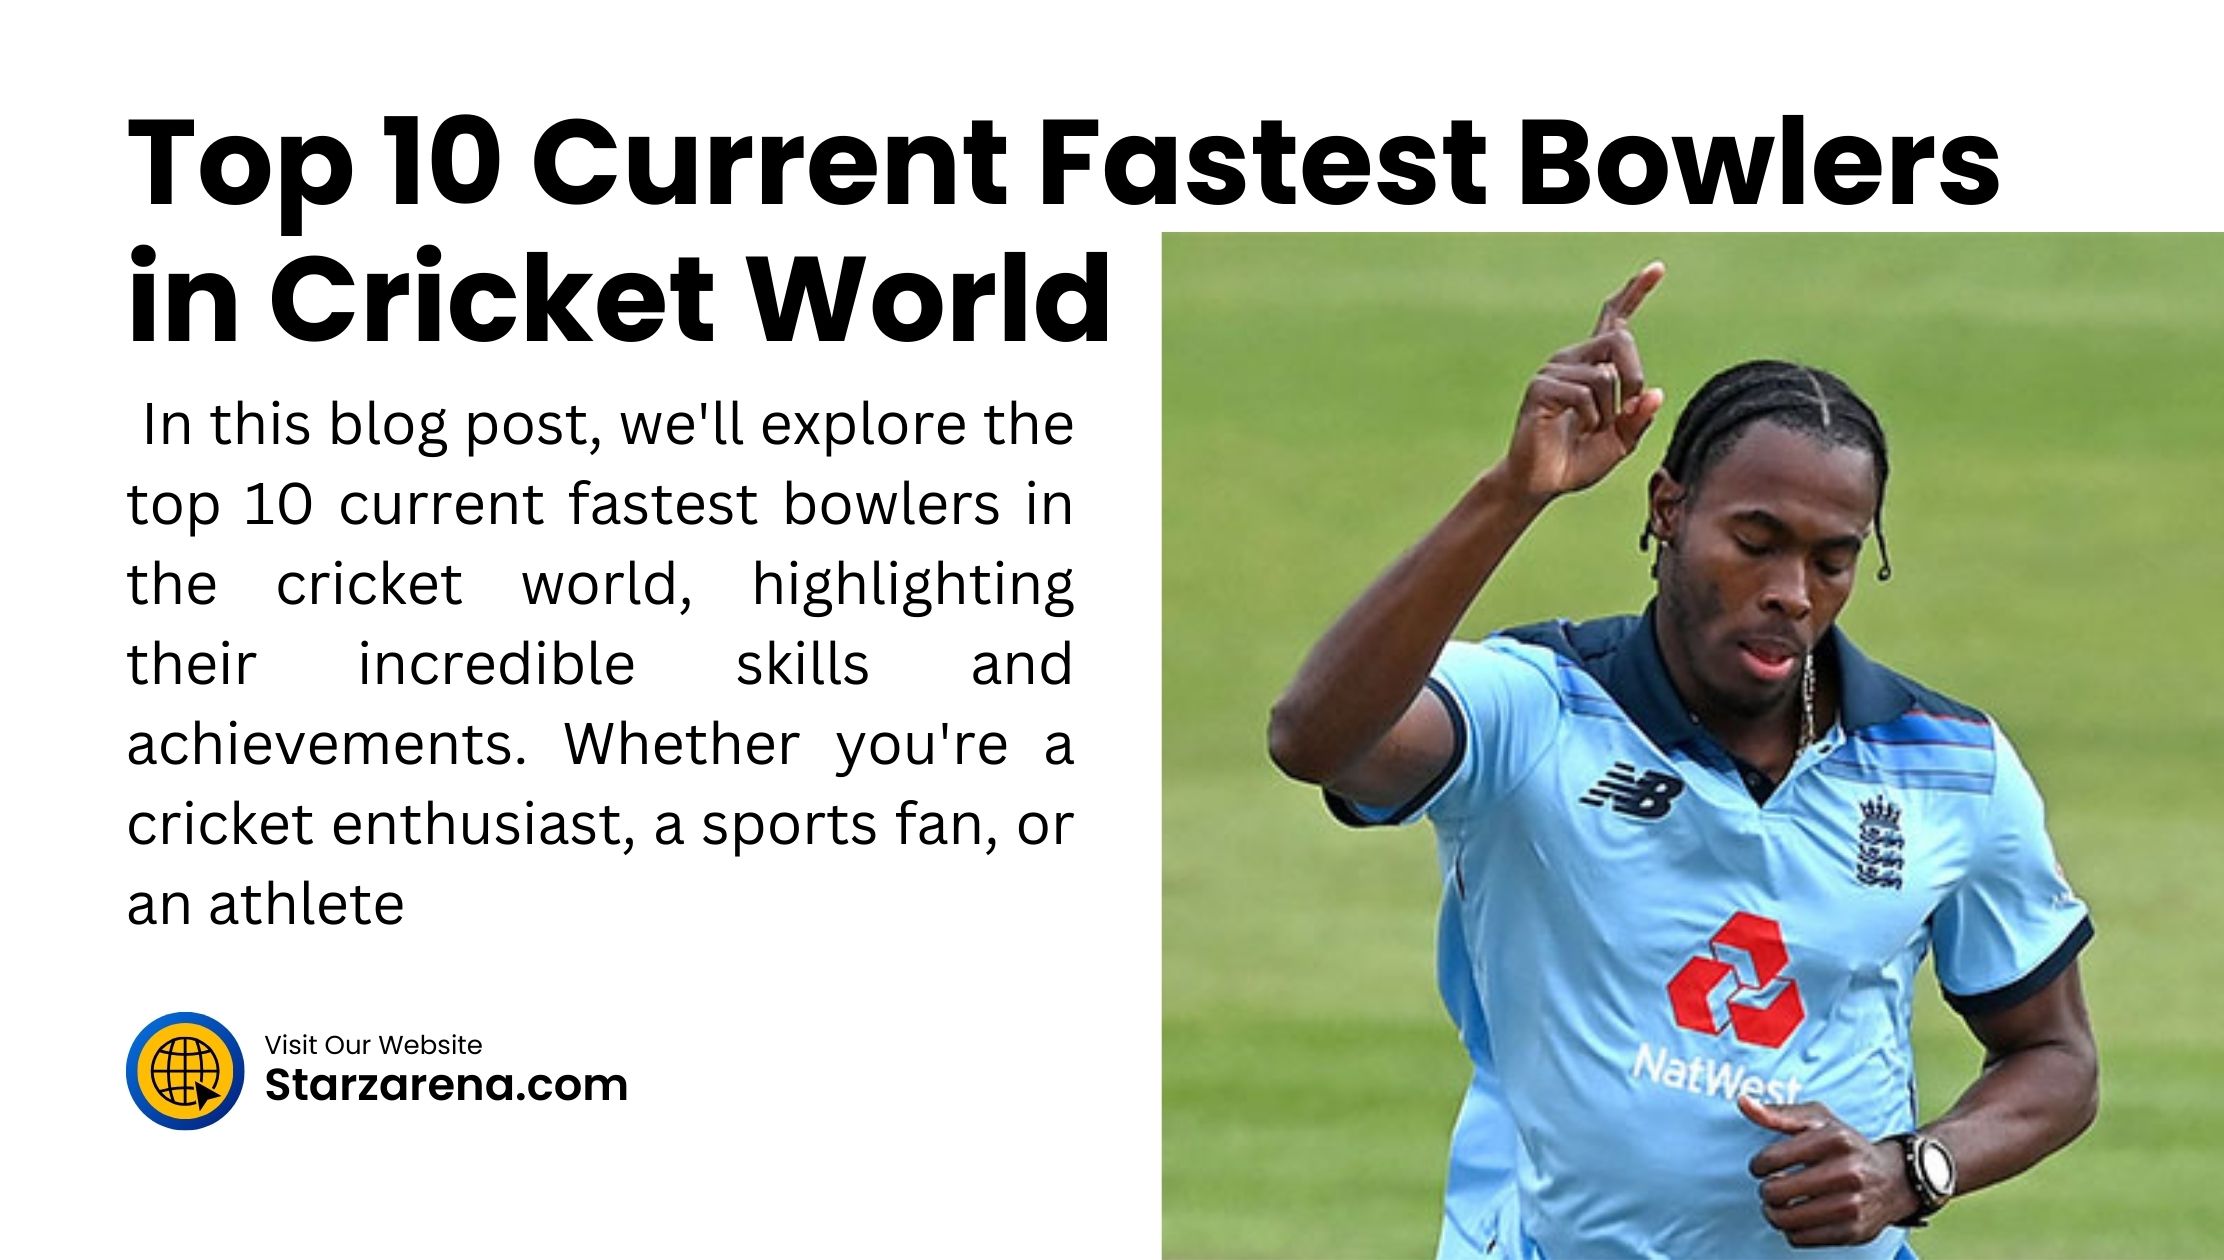 Top 10 Current Fastest Bowlers in Cricket World